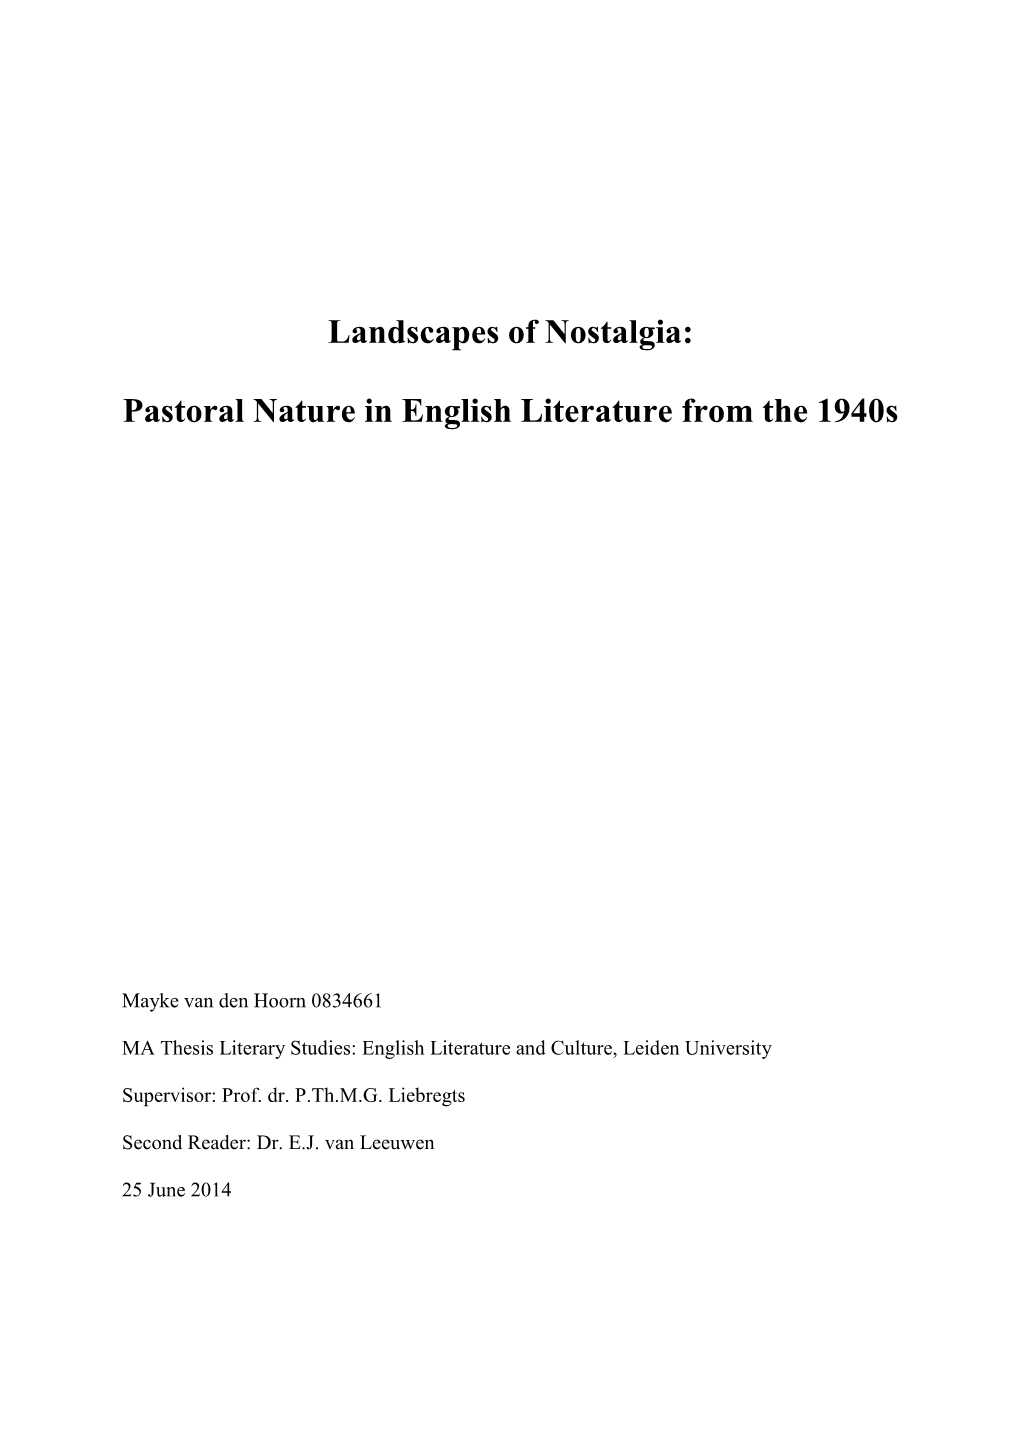 Landscapes of Nostalgia: Pastoral Nature in English Literature From